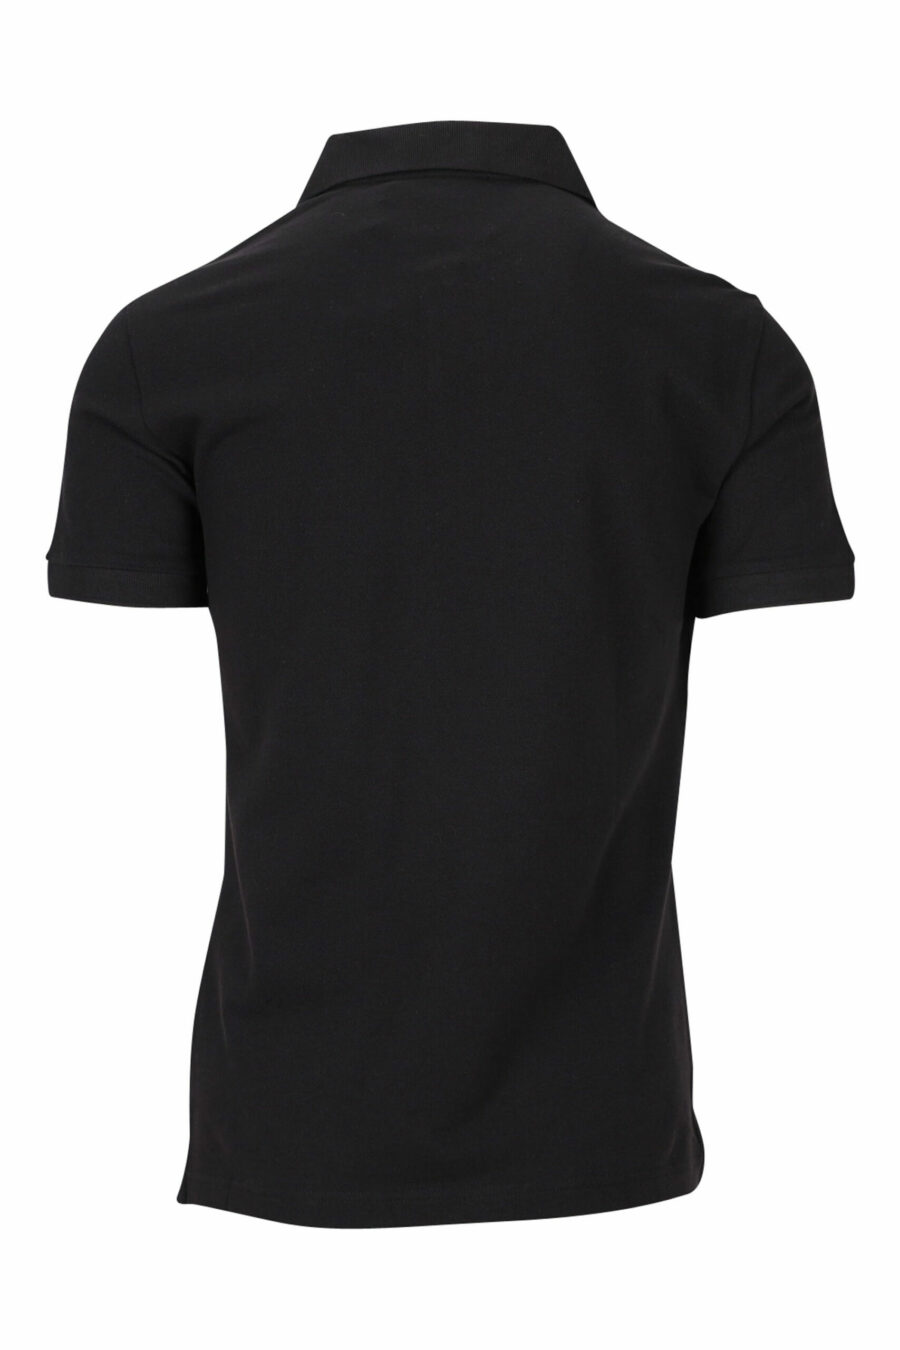 Black polo shirt with zip and contrasting circular mini logo - 8052019467918 1 scaled